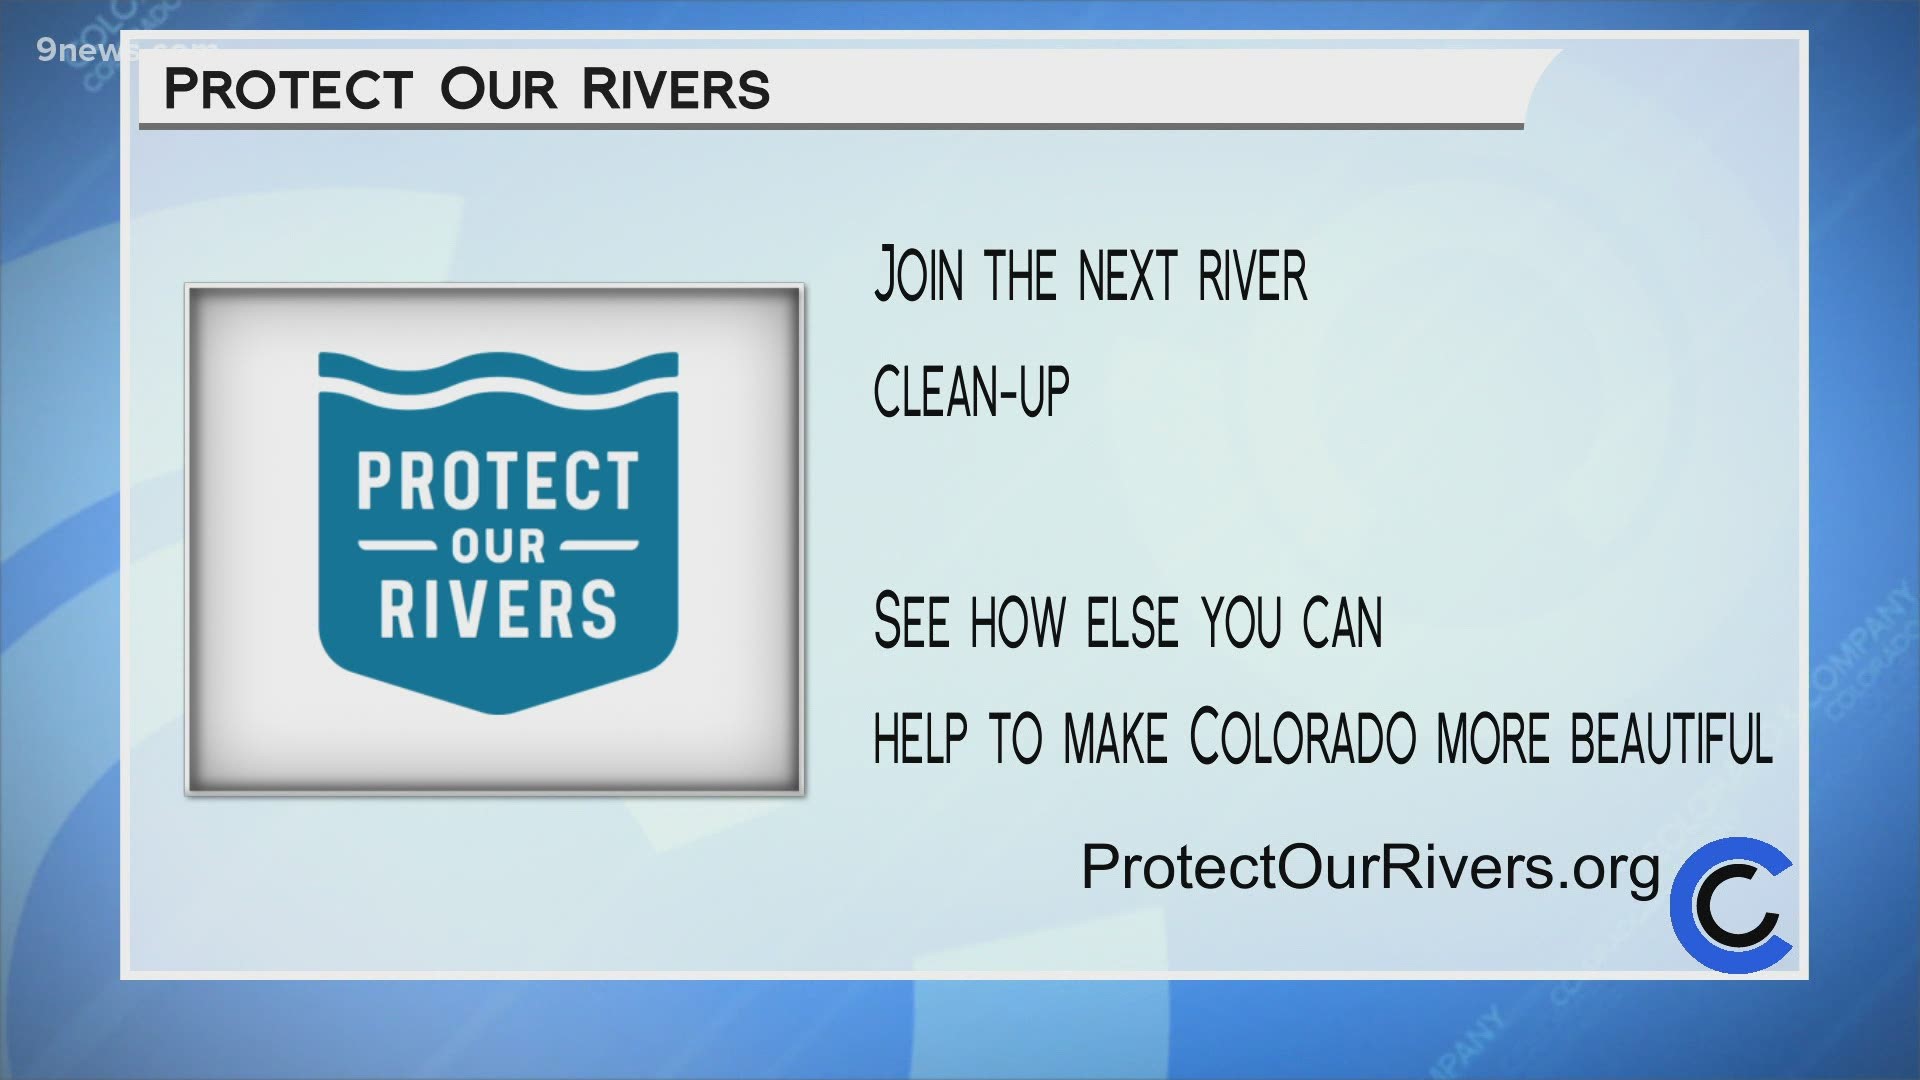 Visit ProtectOurRivers.org to learn more about making a difference and to help out at the next river clean up.